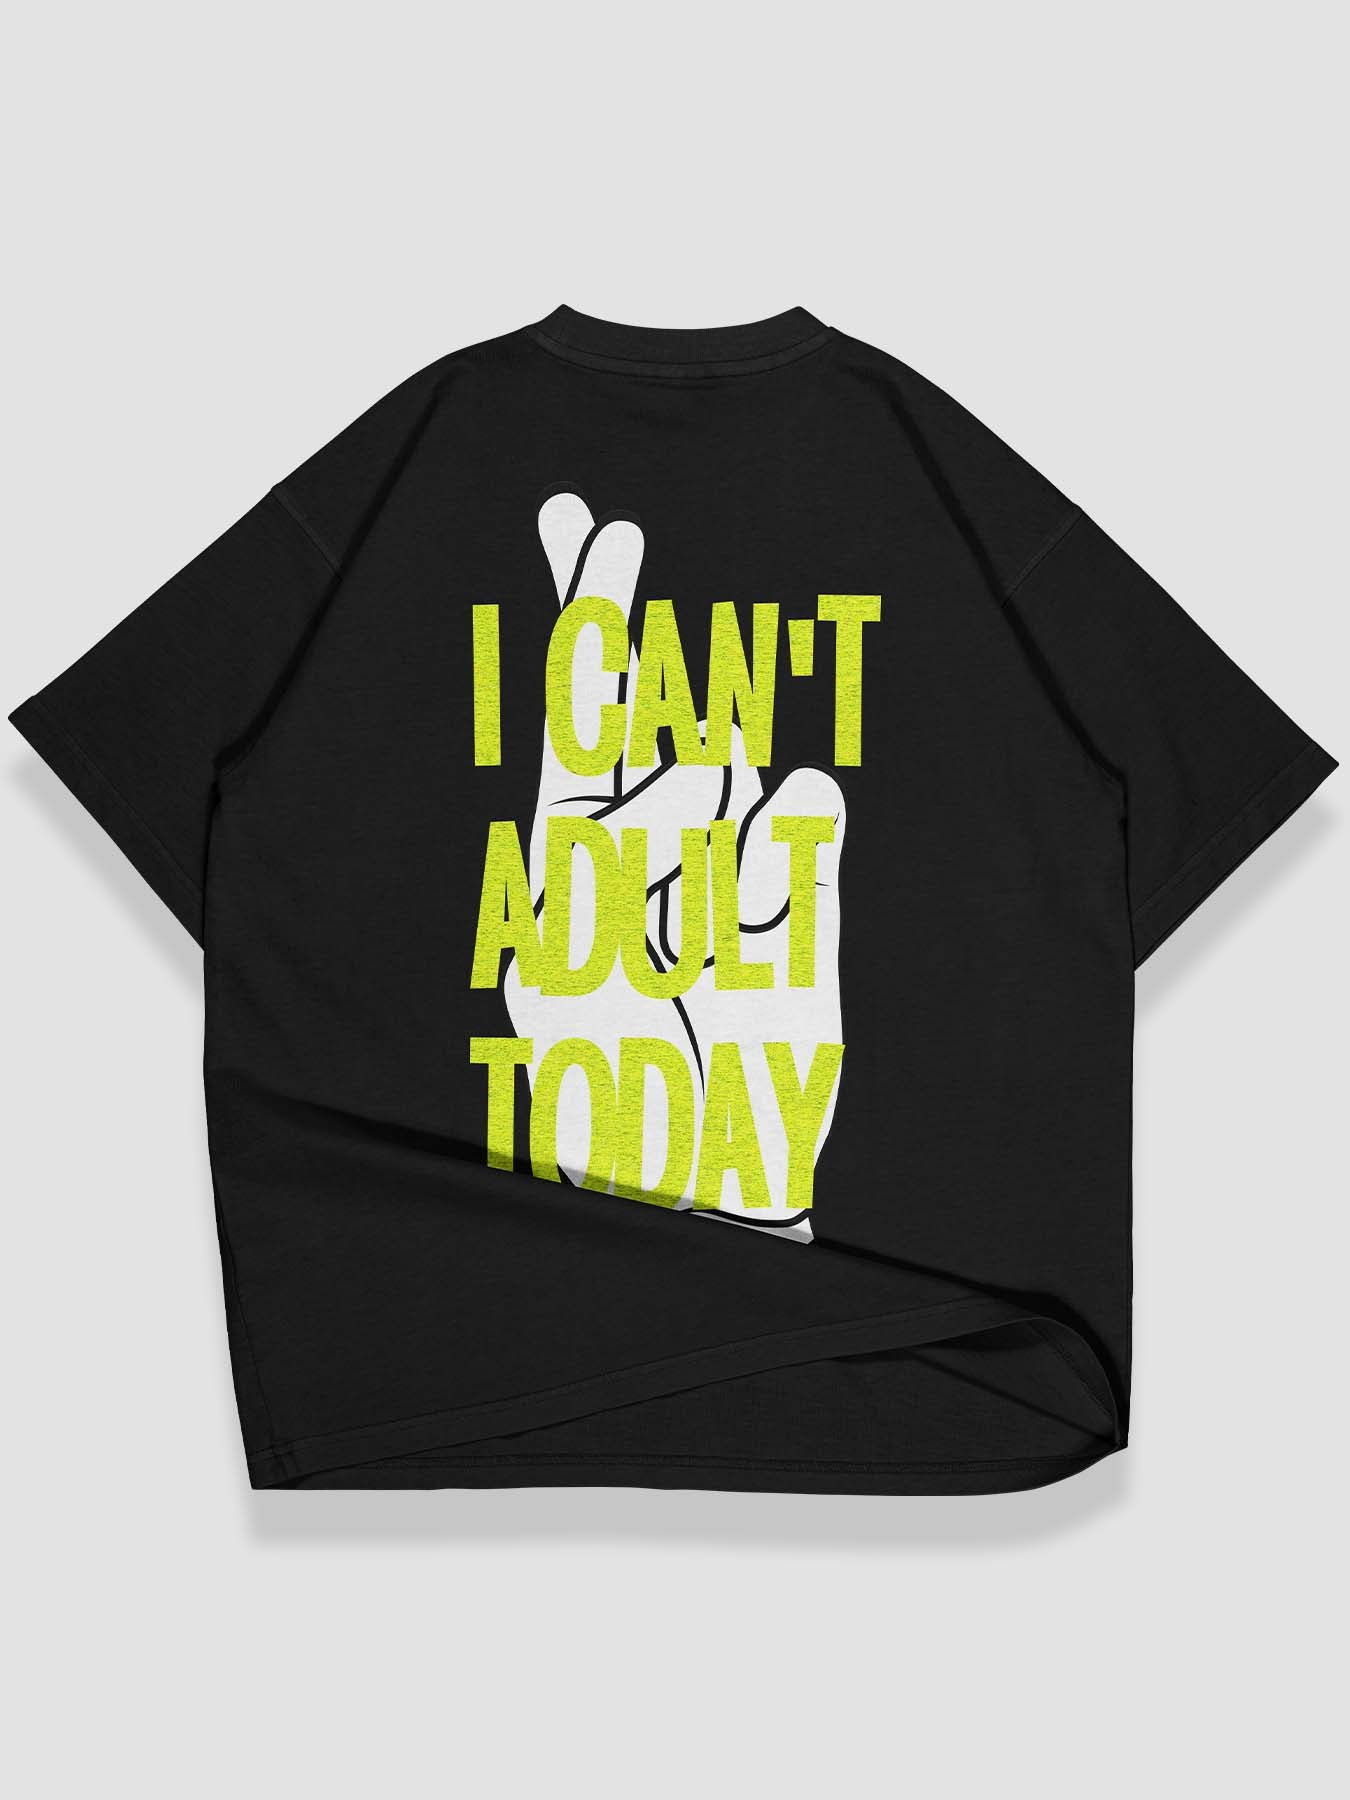 Can't Adult Today Urban Fit Oversize T-shirt - keos.life